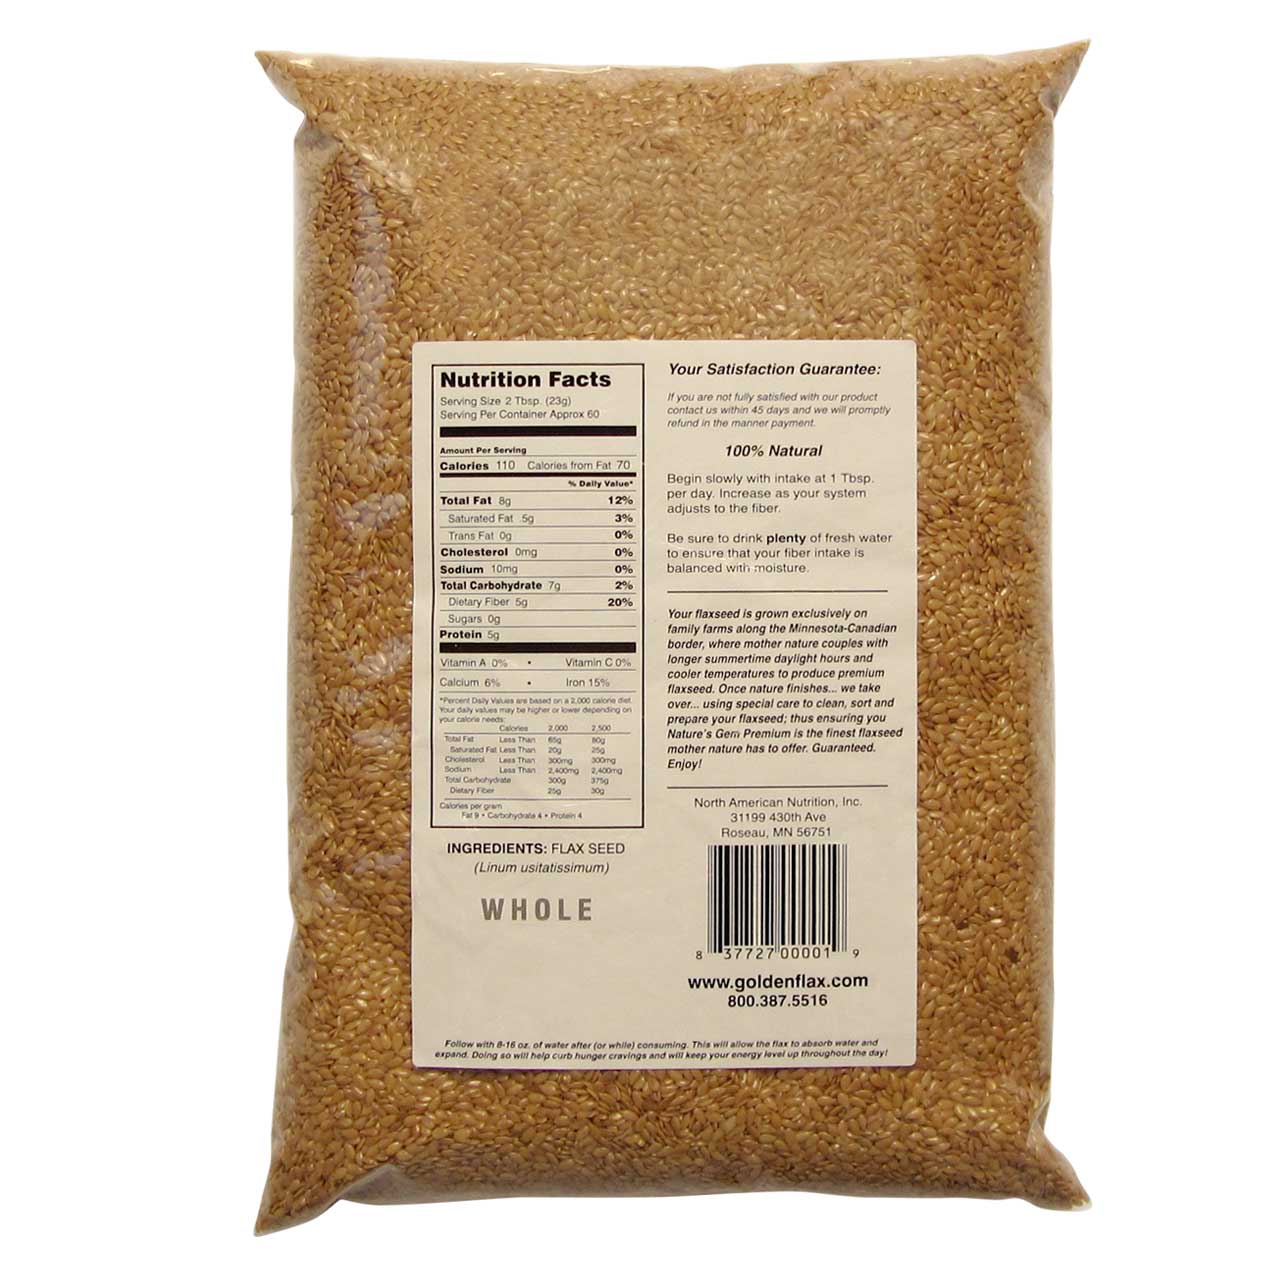 3LB Bag of Whole Golden Flax Nutritional Information from Goldenflax.com